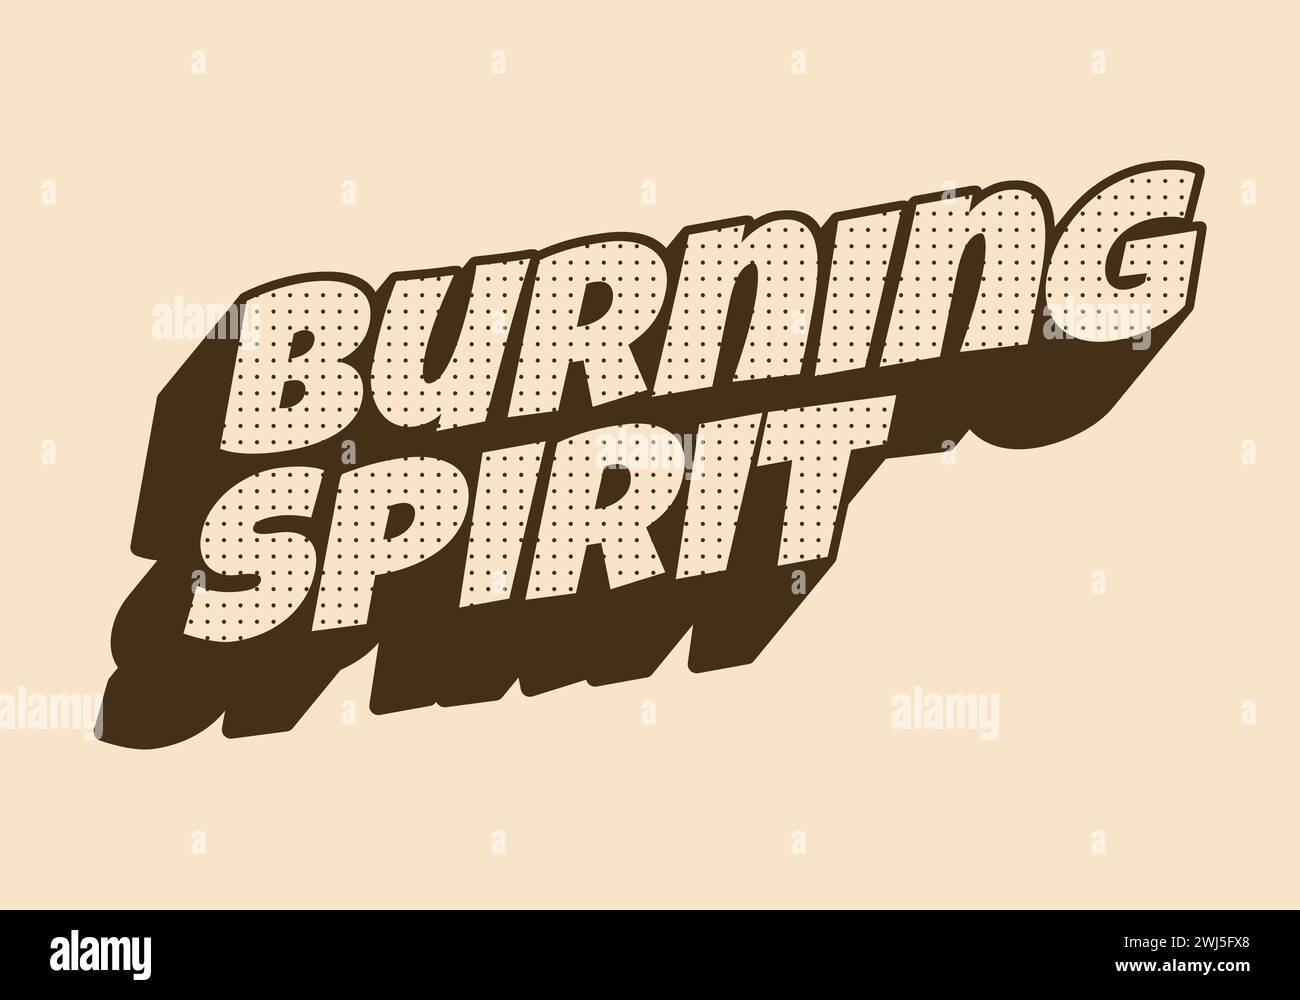 Burning spirit. Text effect design in vintage or retro style Stock Vector